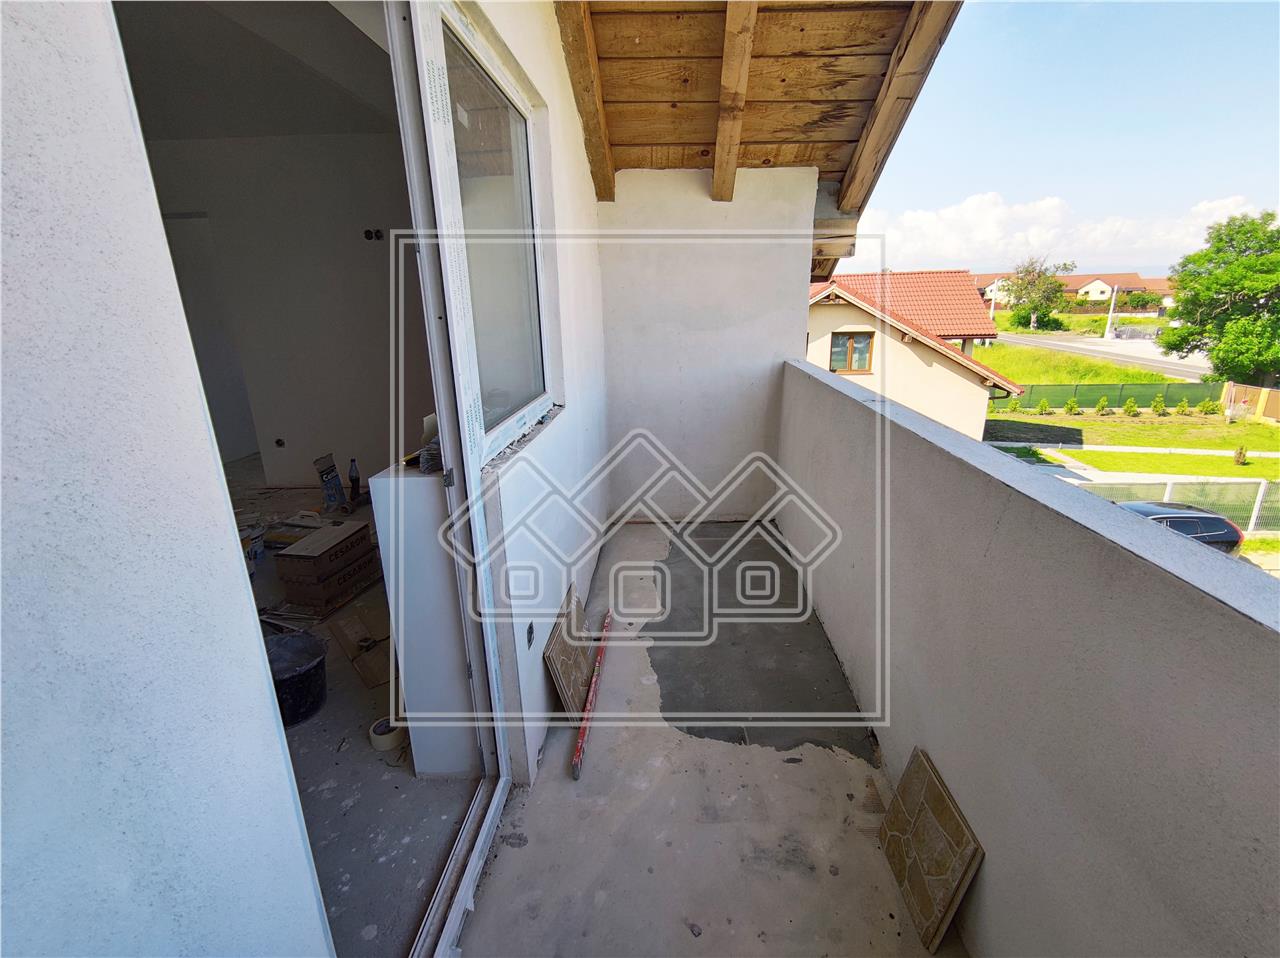 Apartment for sale in Sibiu - villa - 3 rooms - turnkey